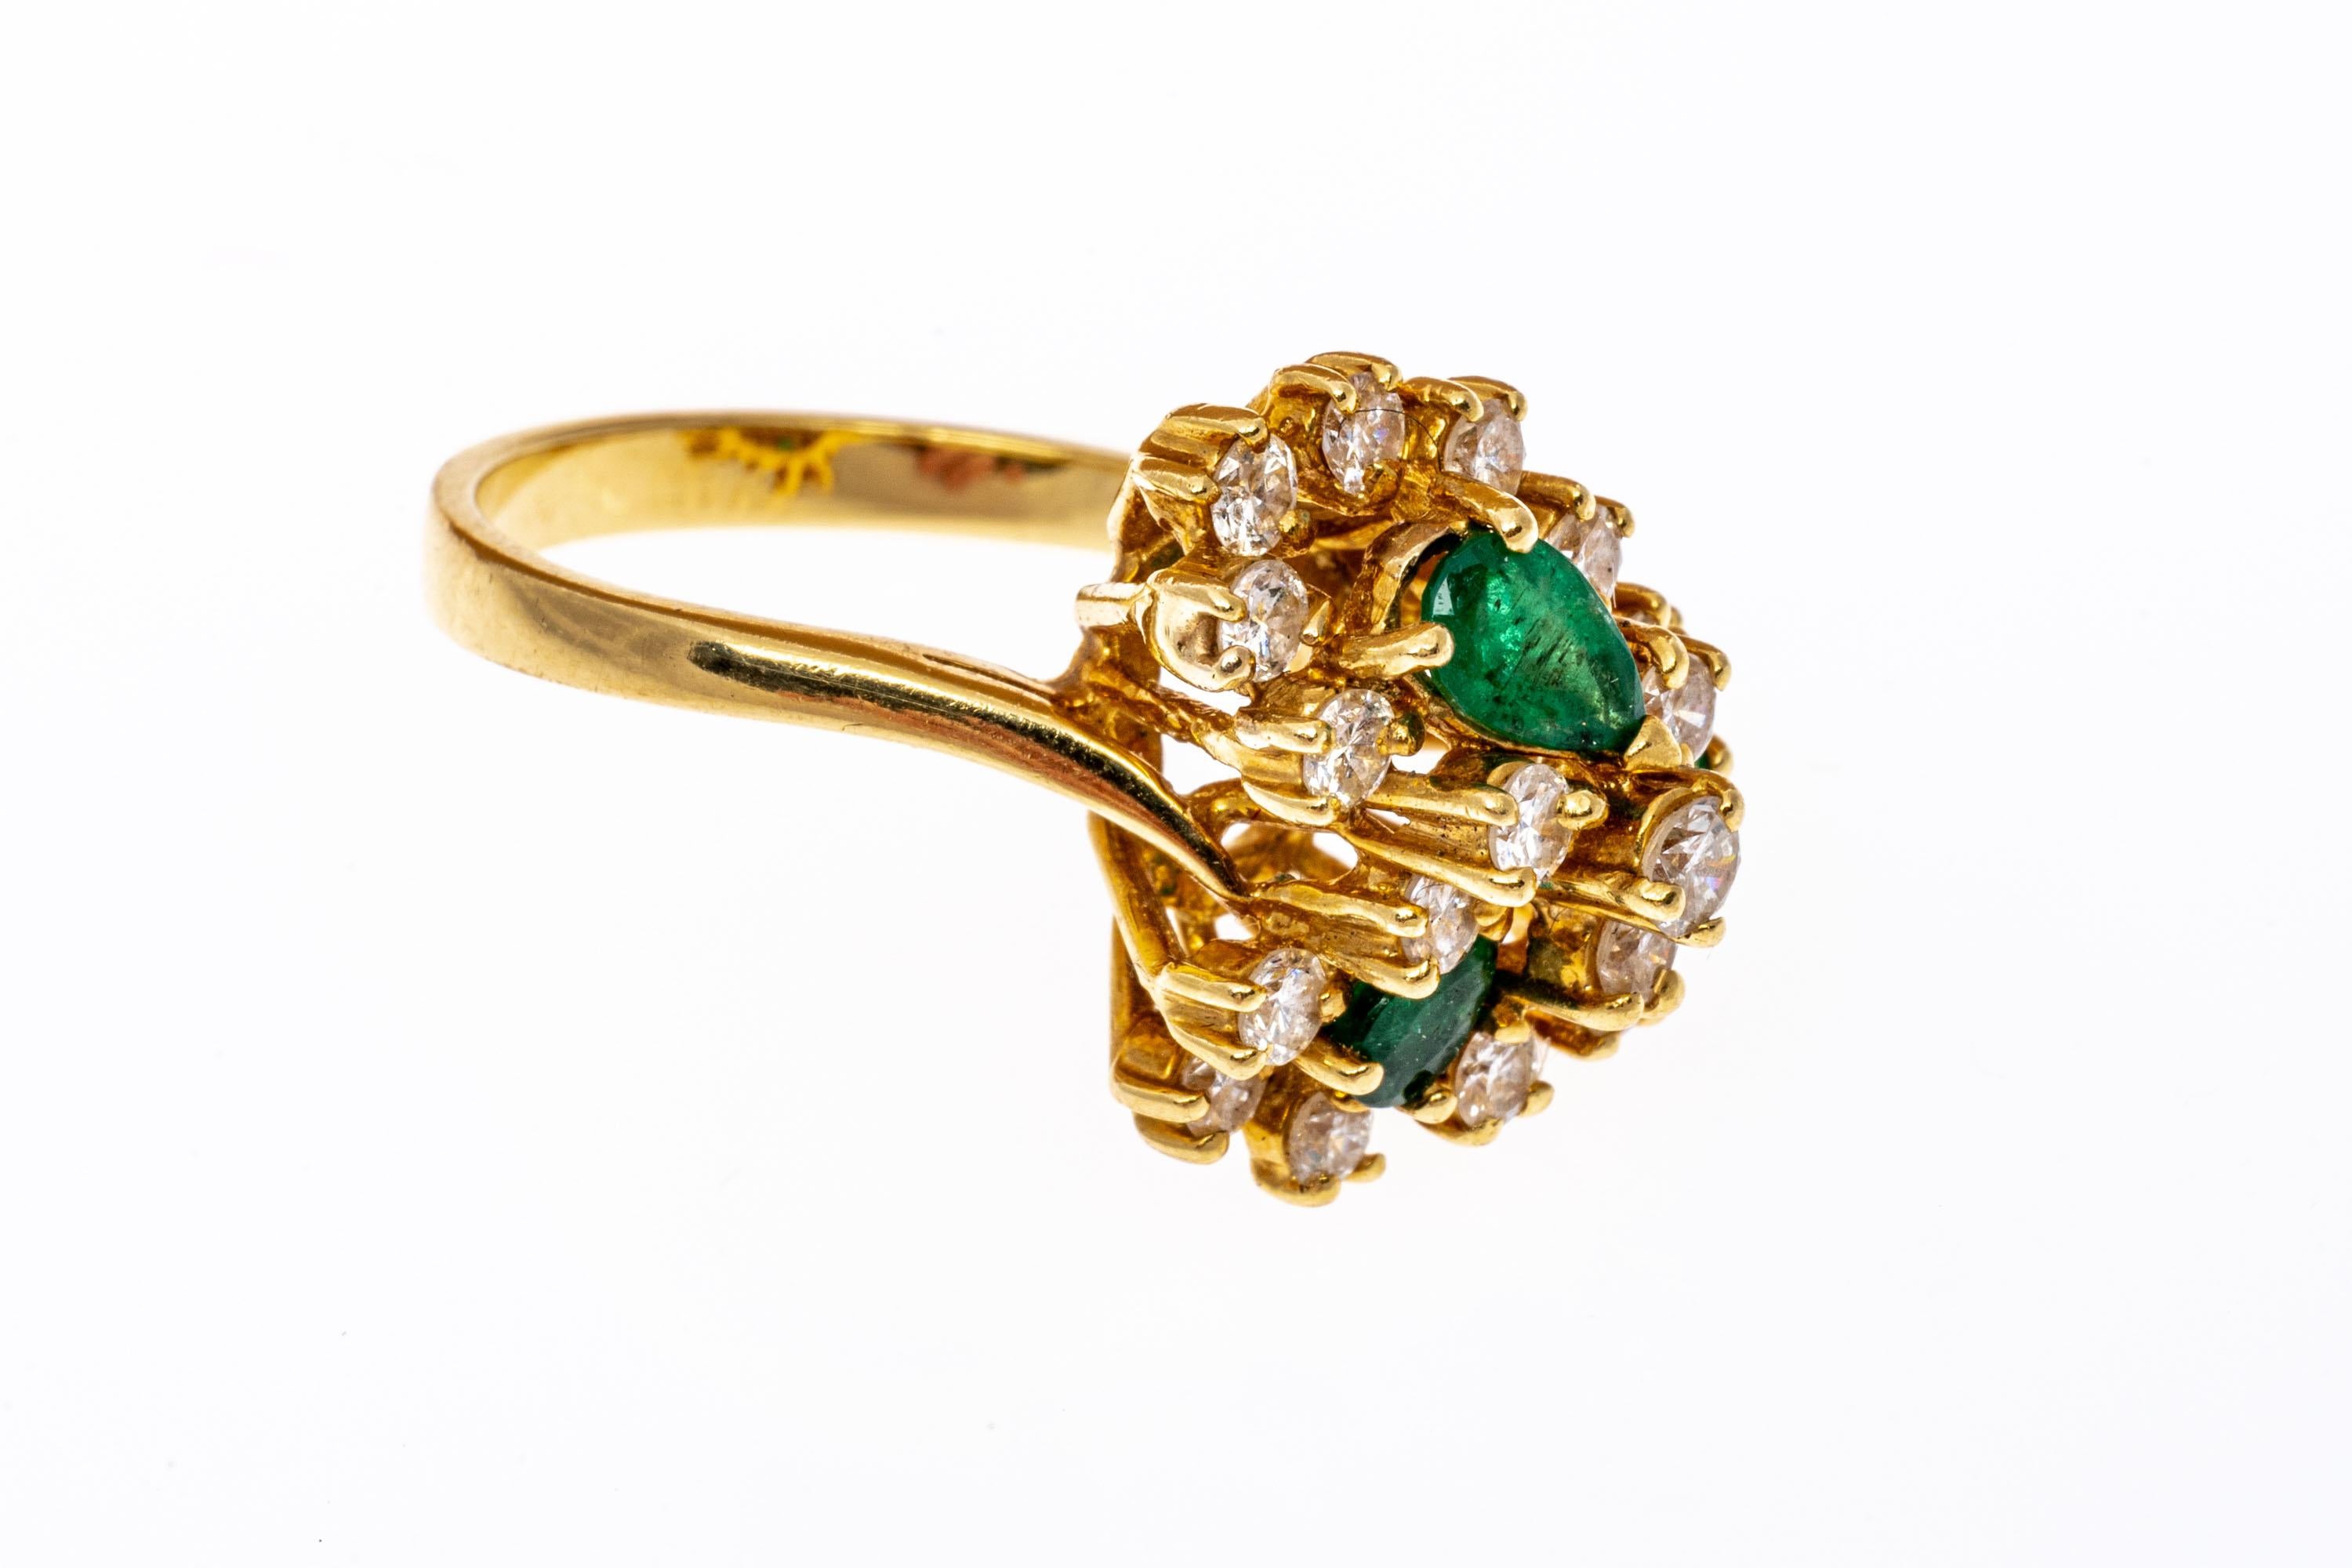 18k yellow gold ring. This outstanding ring contains three pear shaped faceted round, deep green color emeralds, prong set, approximately 0.63TCW. Surrounding the emeralds, above and below, are clusters of round brilliant cut faceted diamonds,